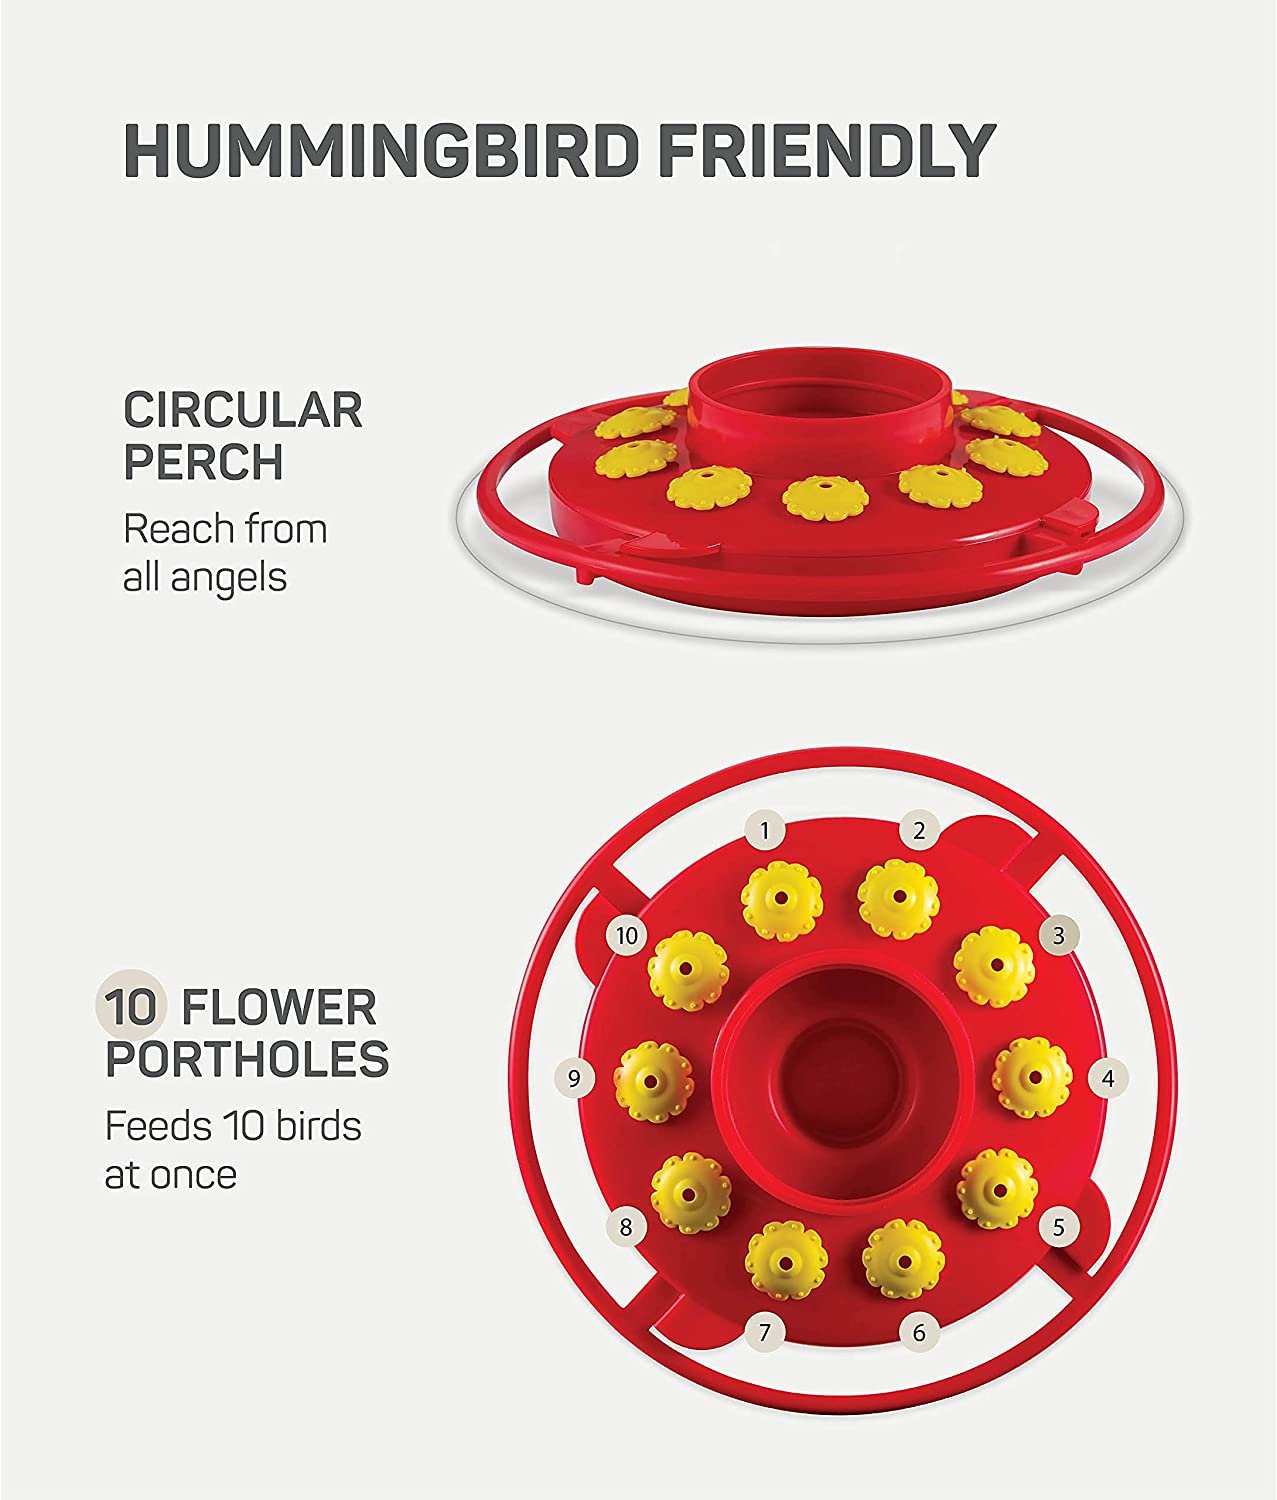 Hummingbird Feeder 16 oz [Set of 2] Plastic Hummingbird Feeders for Outdoors, With Built-in Ant Guard - Circular Perch With 10 Feeding Ports/Wide Mouth for Easy Filling/2 Part Base for Easy Cleaning